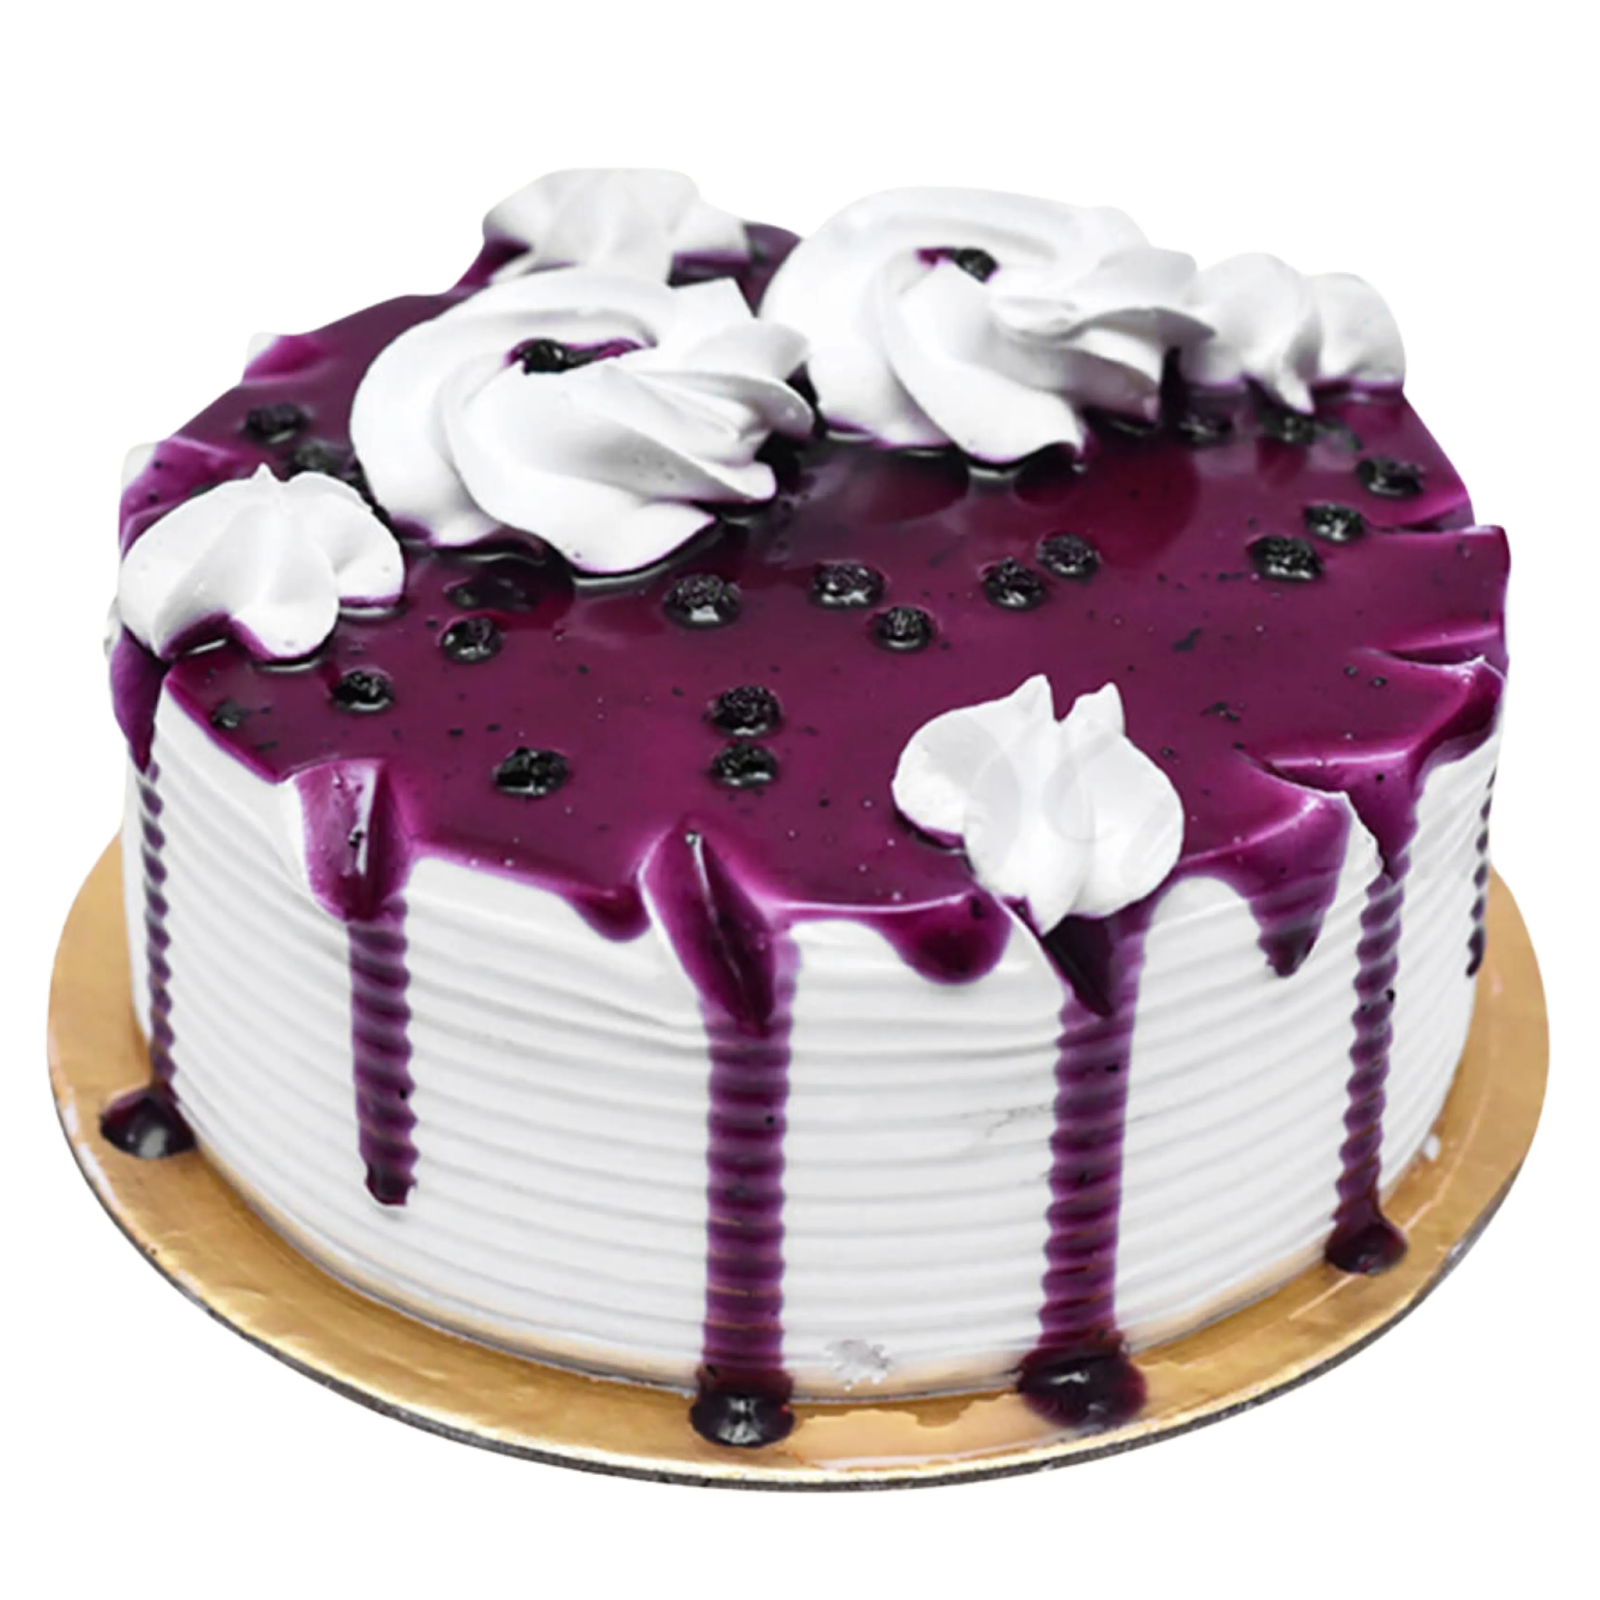 Imported Berry Cake by Belly Amy's